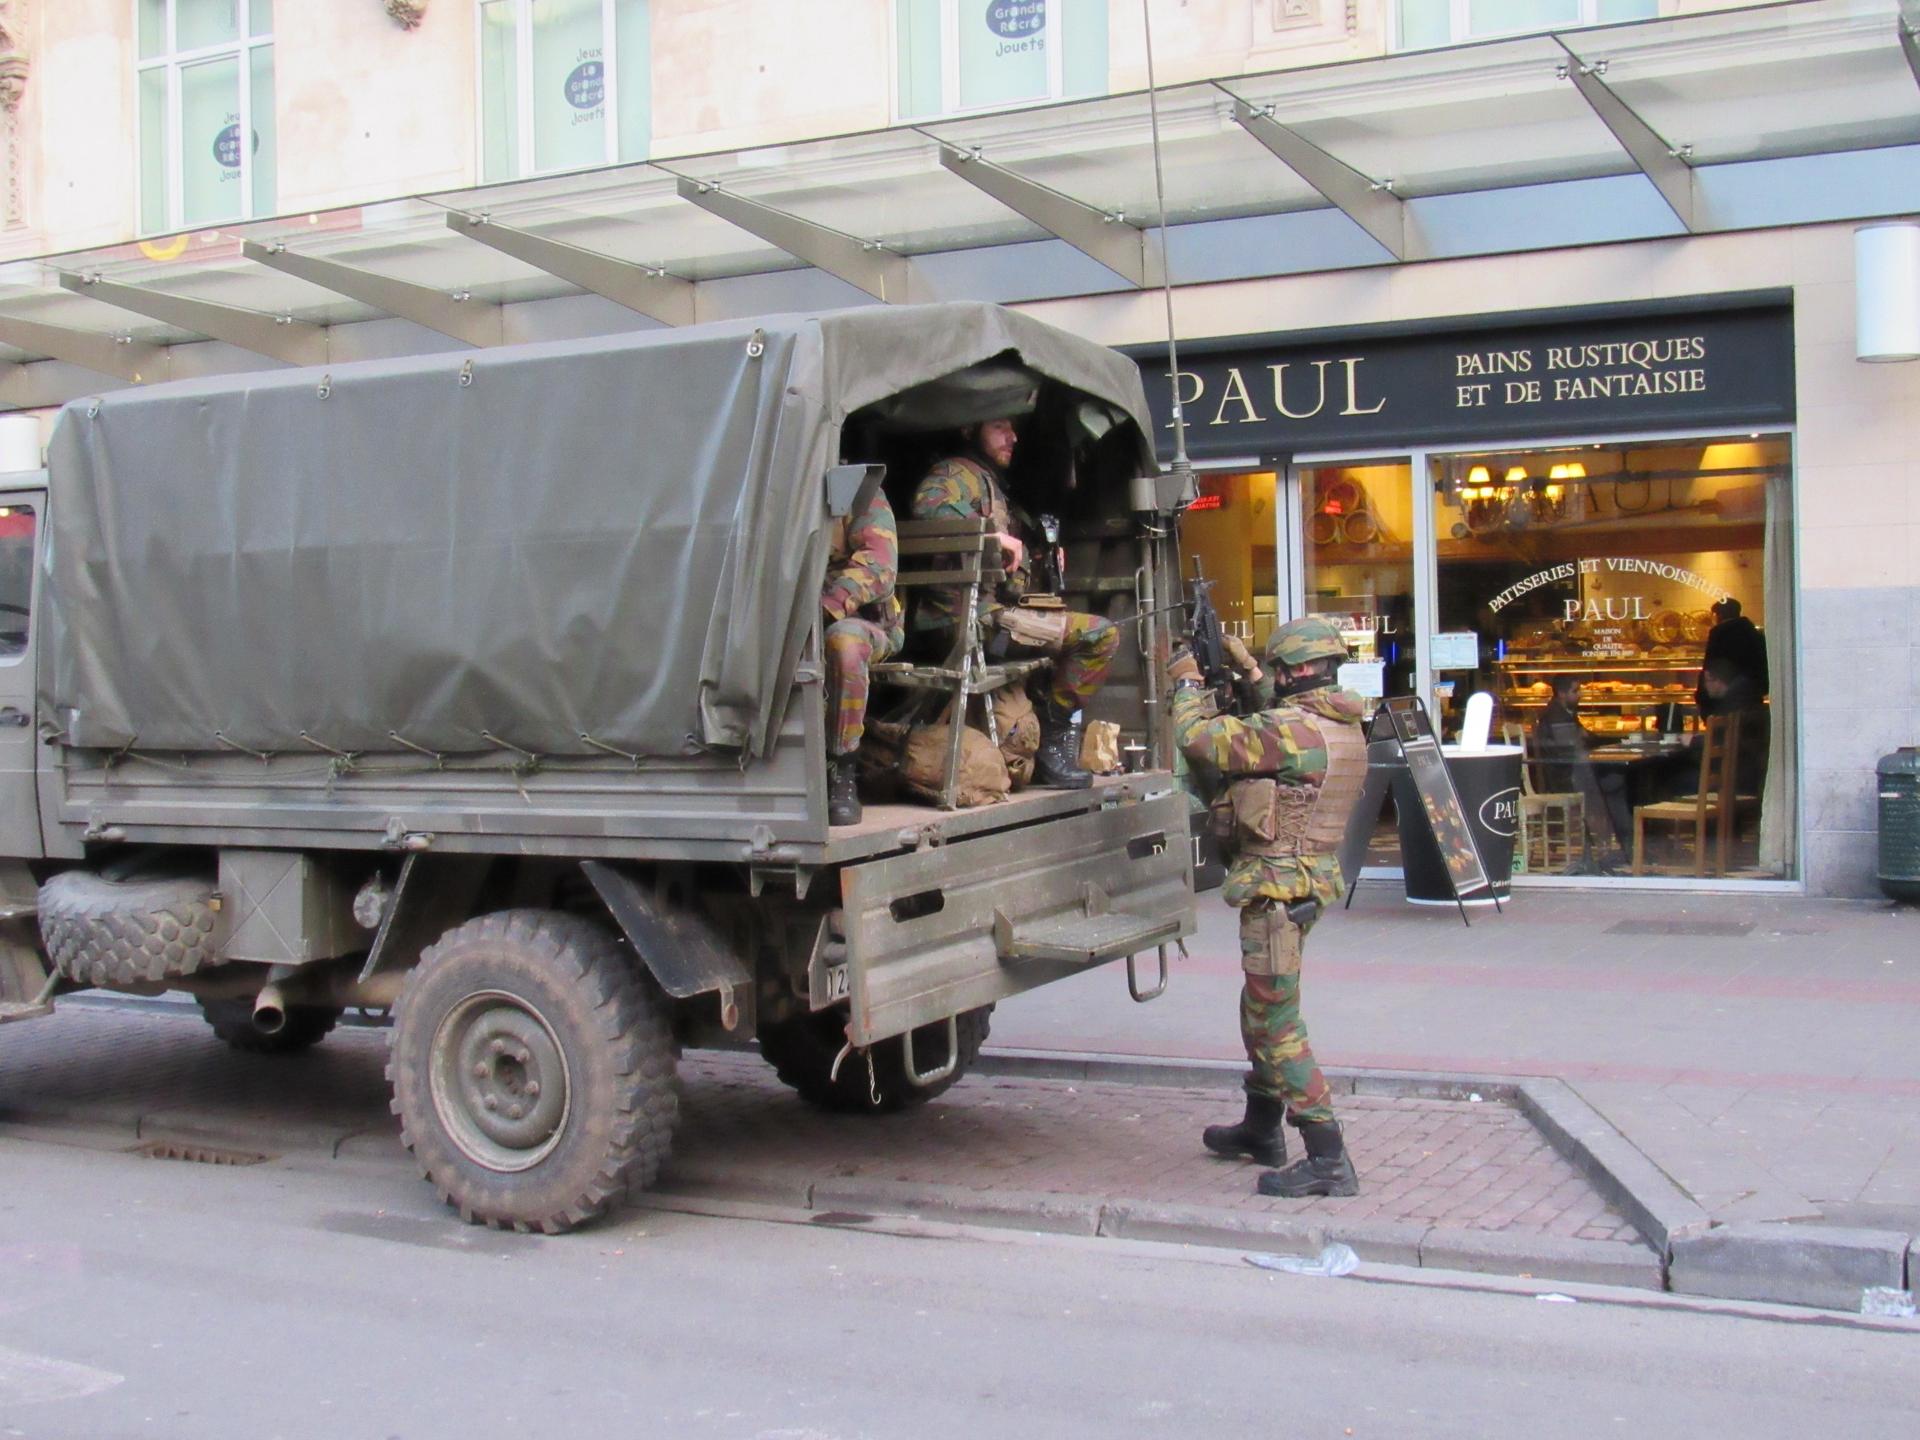 A Belgian military truck parked in downtown Brussels.